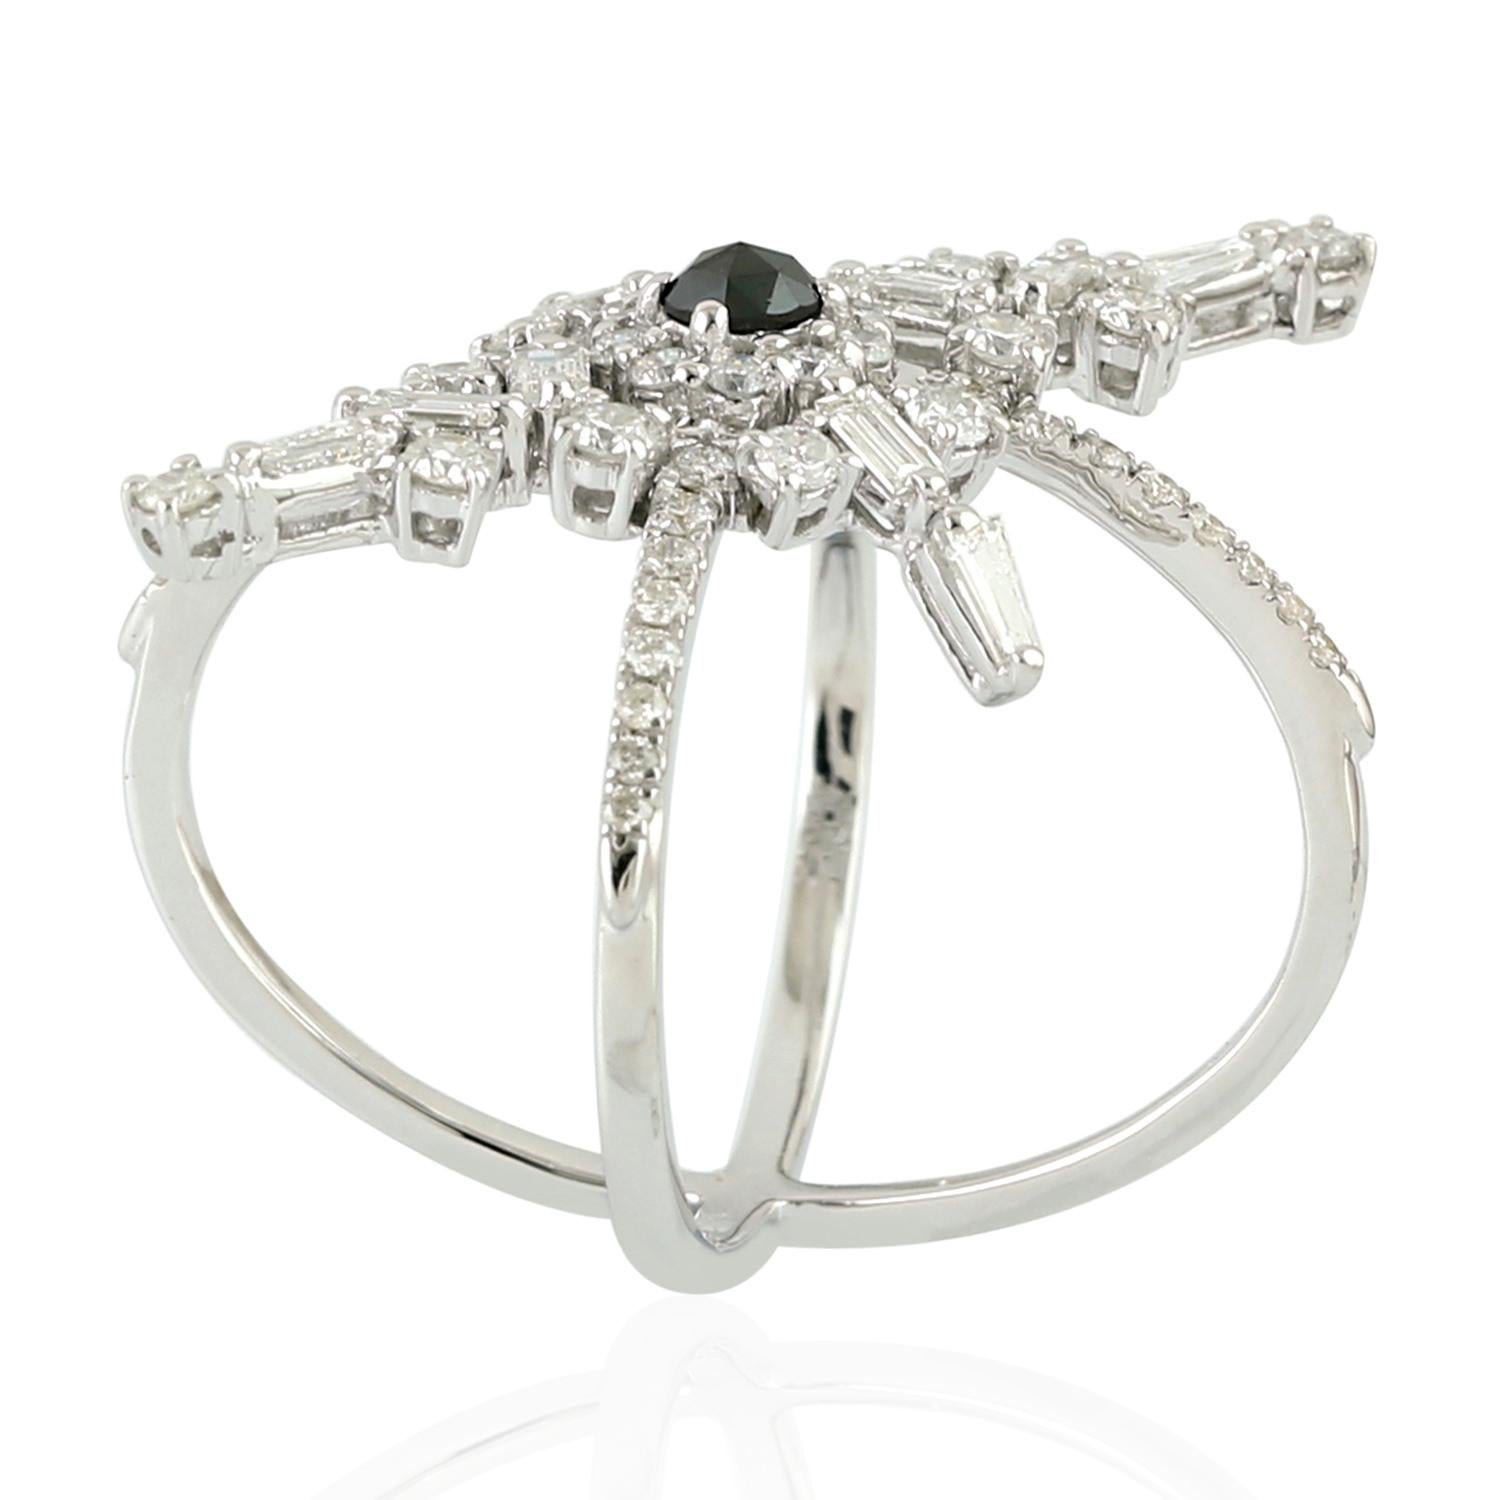 Mixed Cut Star Shape Baguette Ring with Black Diamond in Center Enclosed by Pave Diamonds For Sale